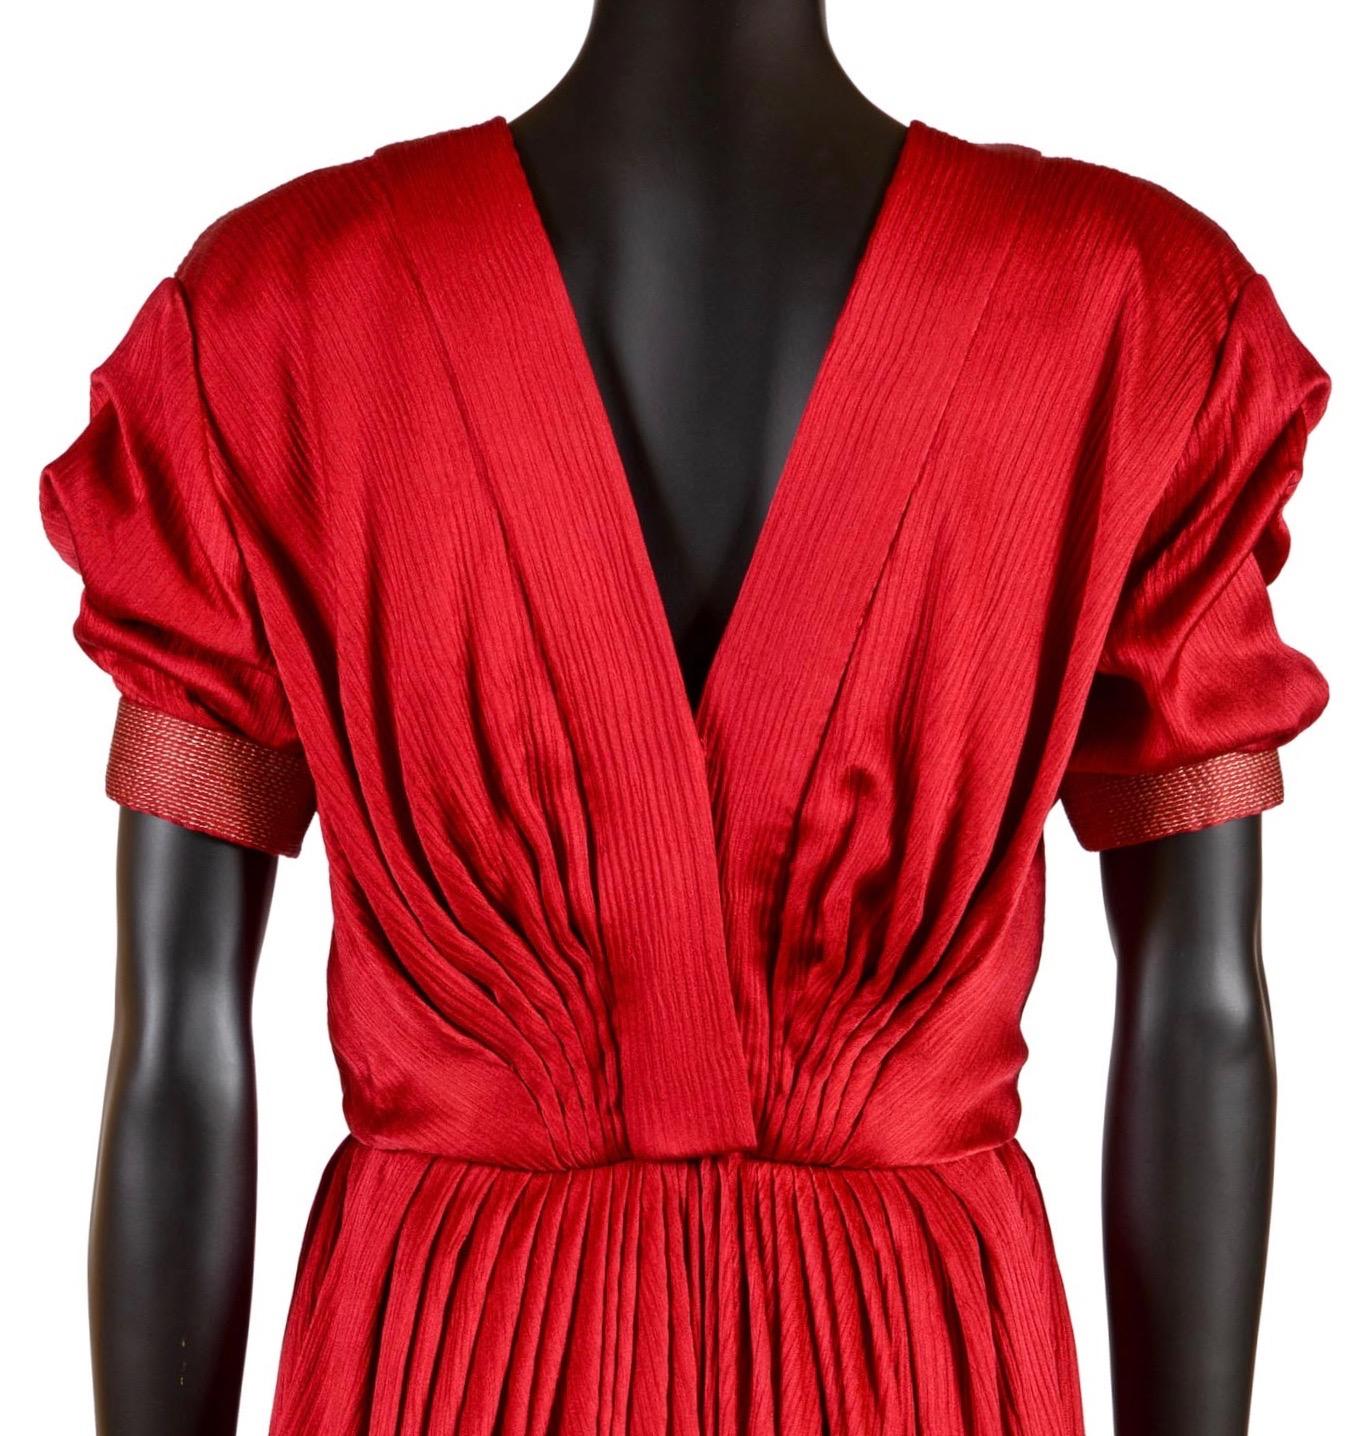 Christian Dior Haute Couture dress  For Sale 2